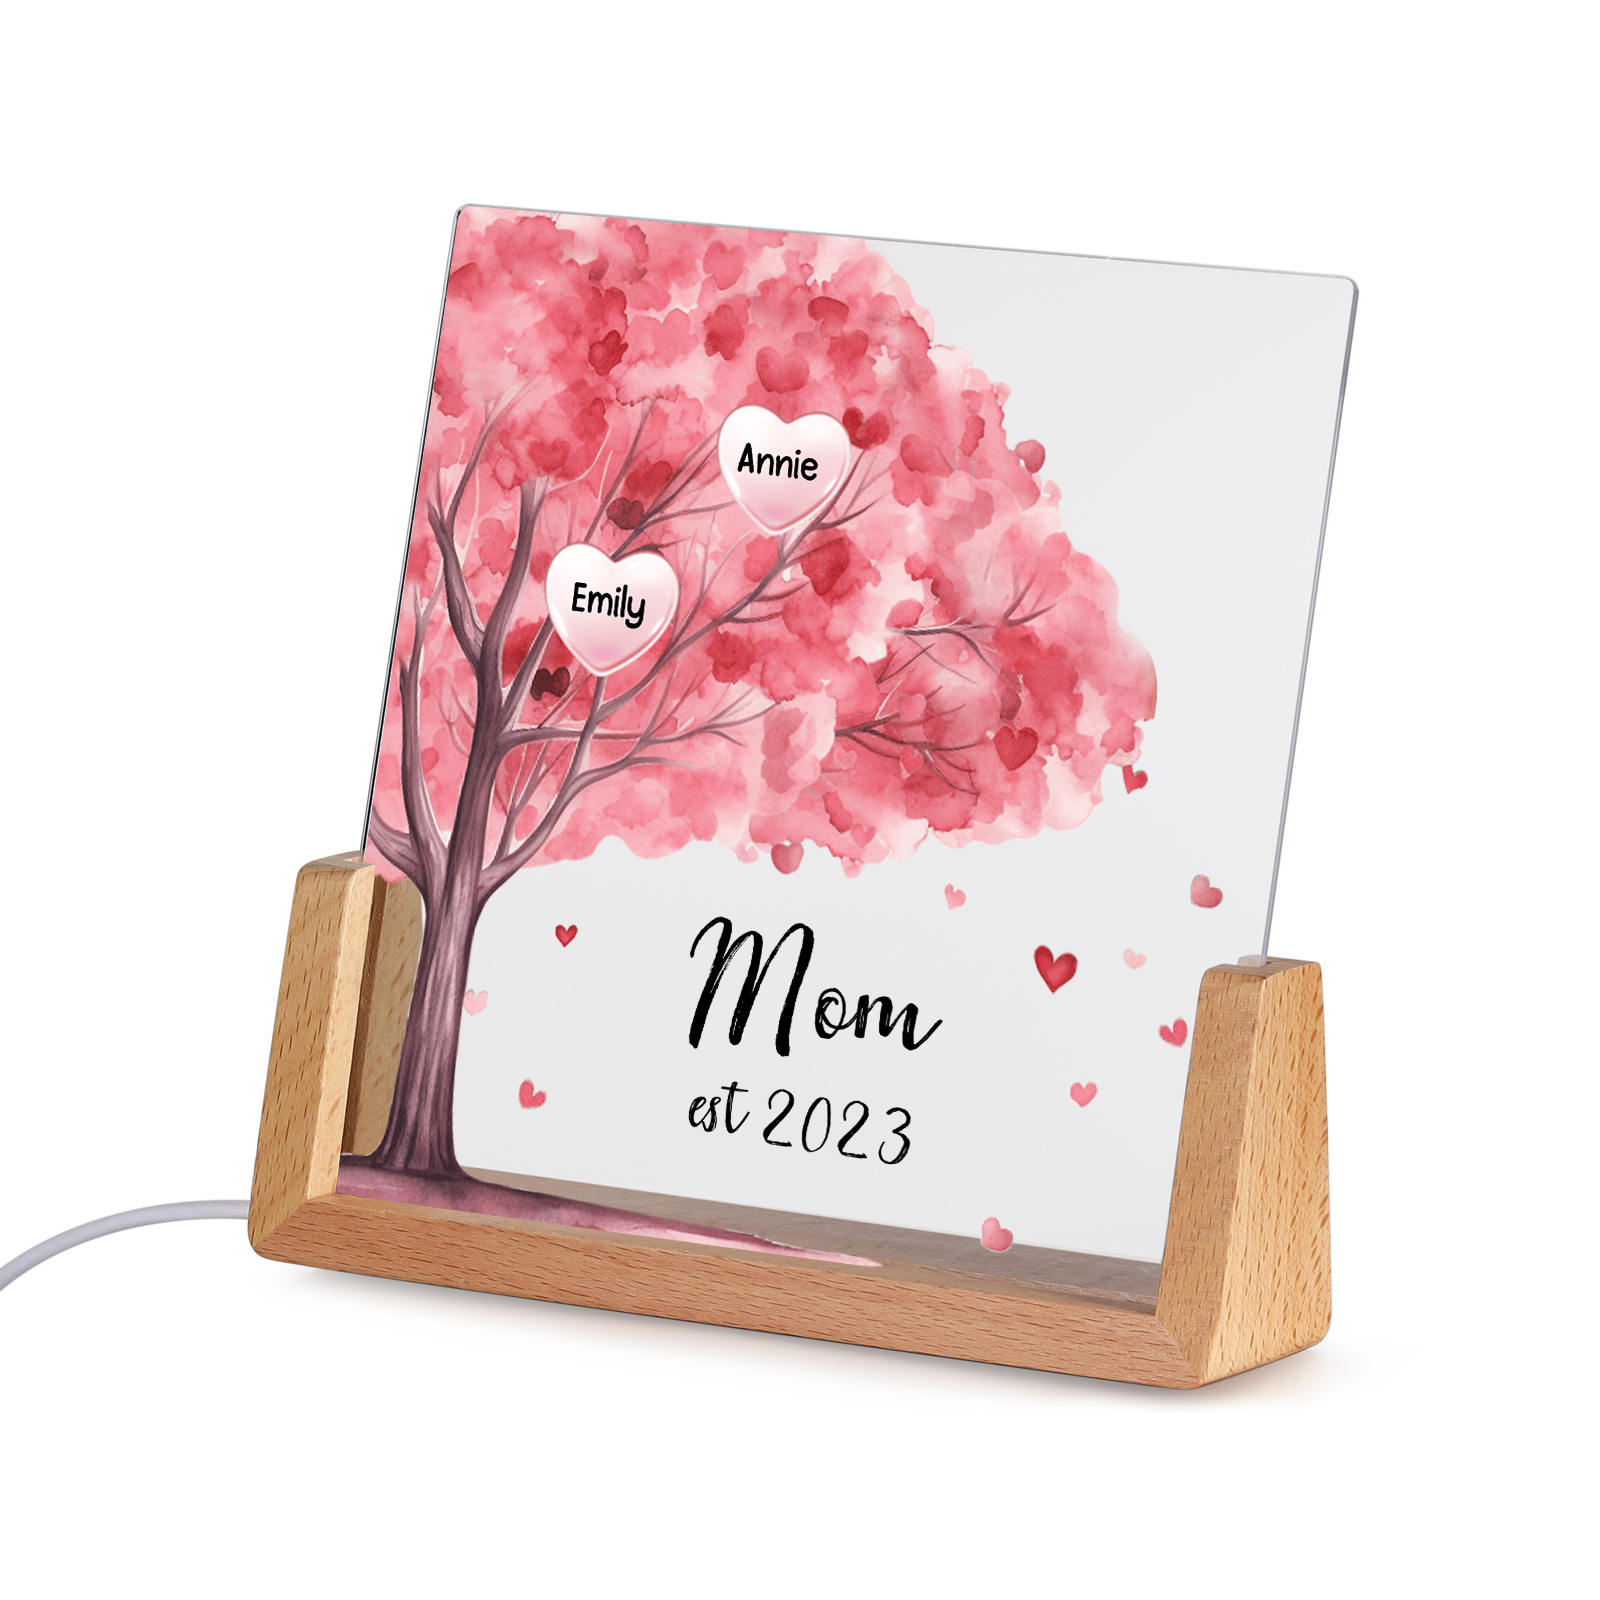 2 Names - Personalized Sakura Tree Night Light with Custom Text And Date LED Light, Gift for Mom